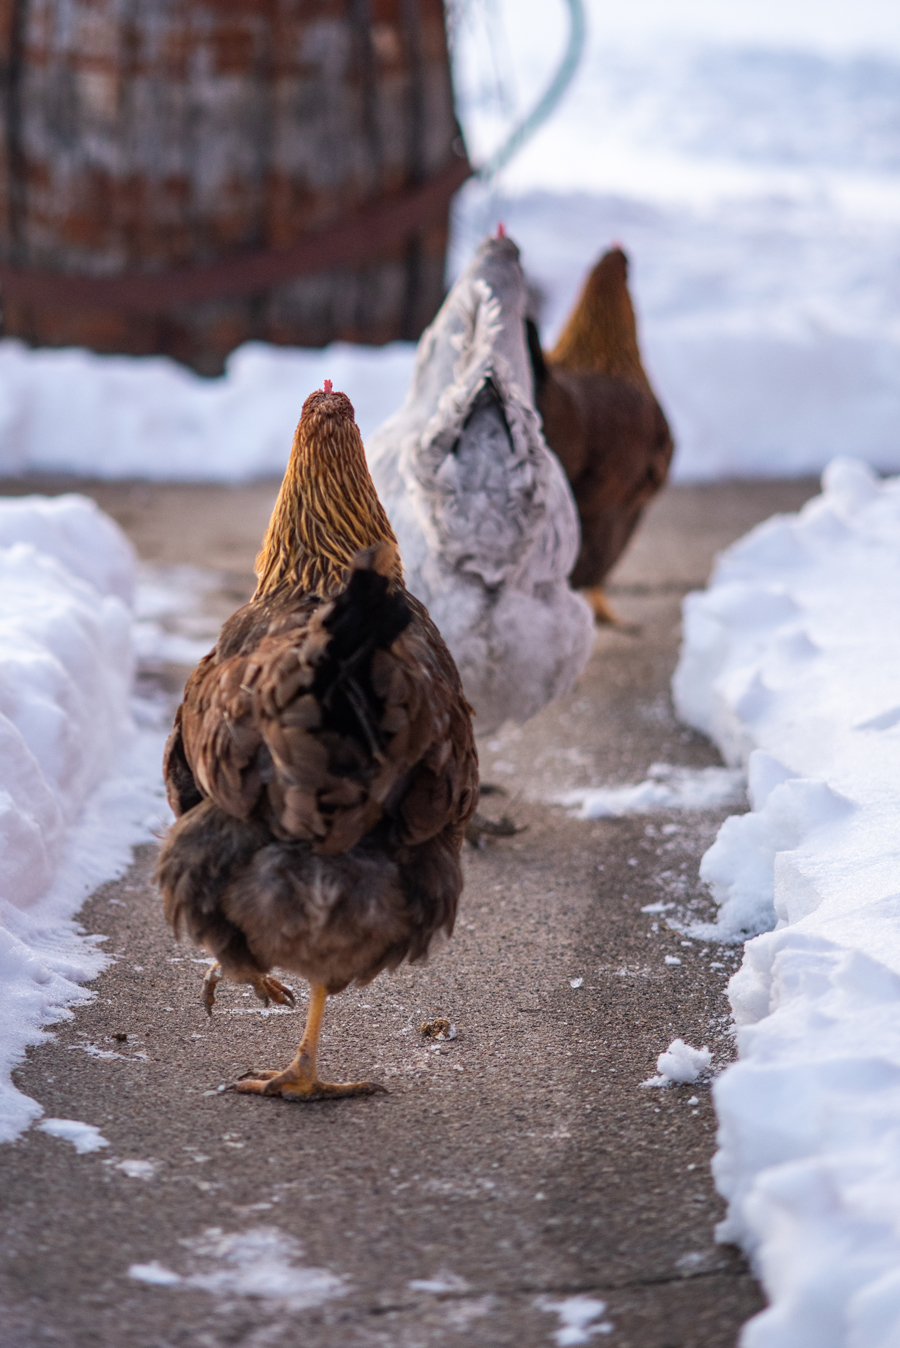 McMurray Hatchery Blog | Gail Damerow | Winter Considerations for Chickens